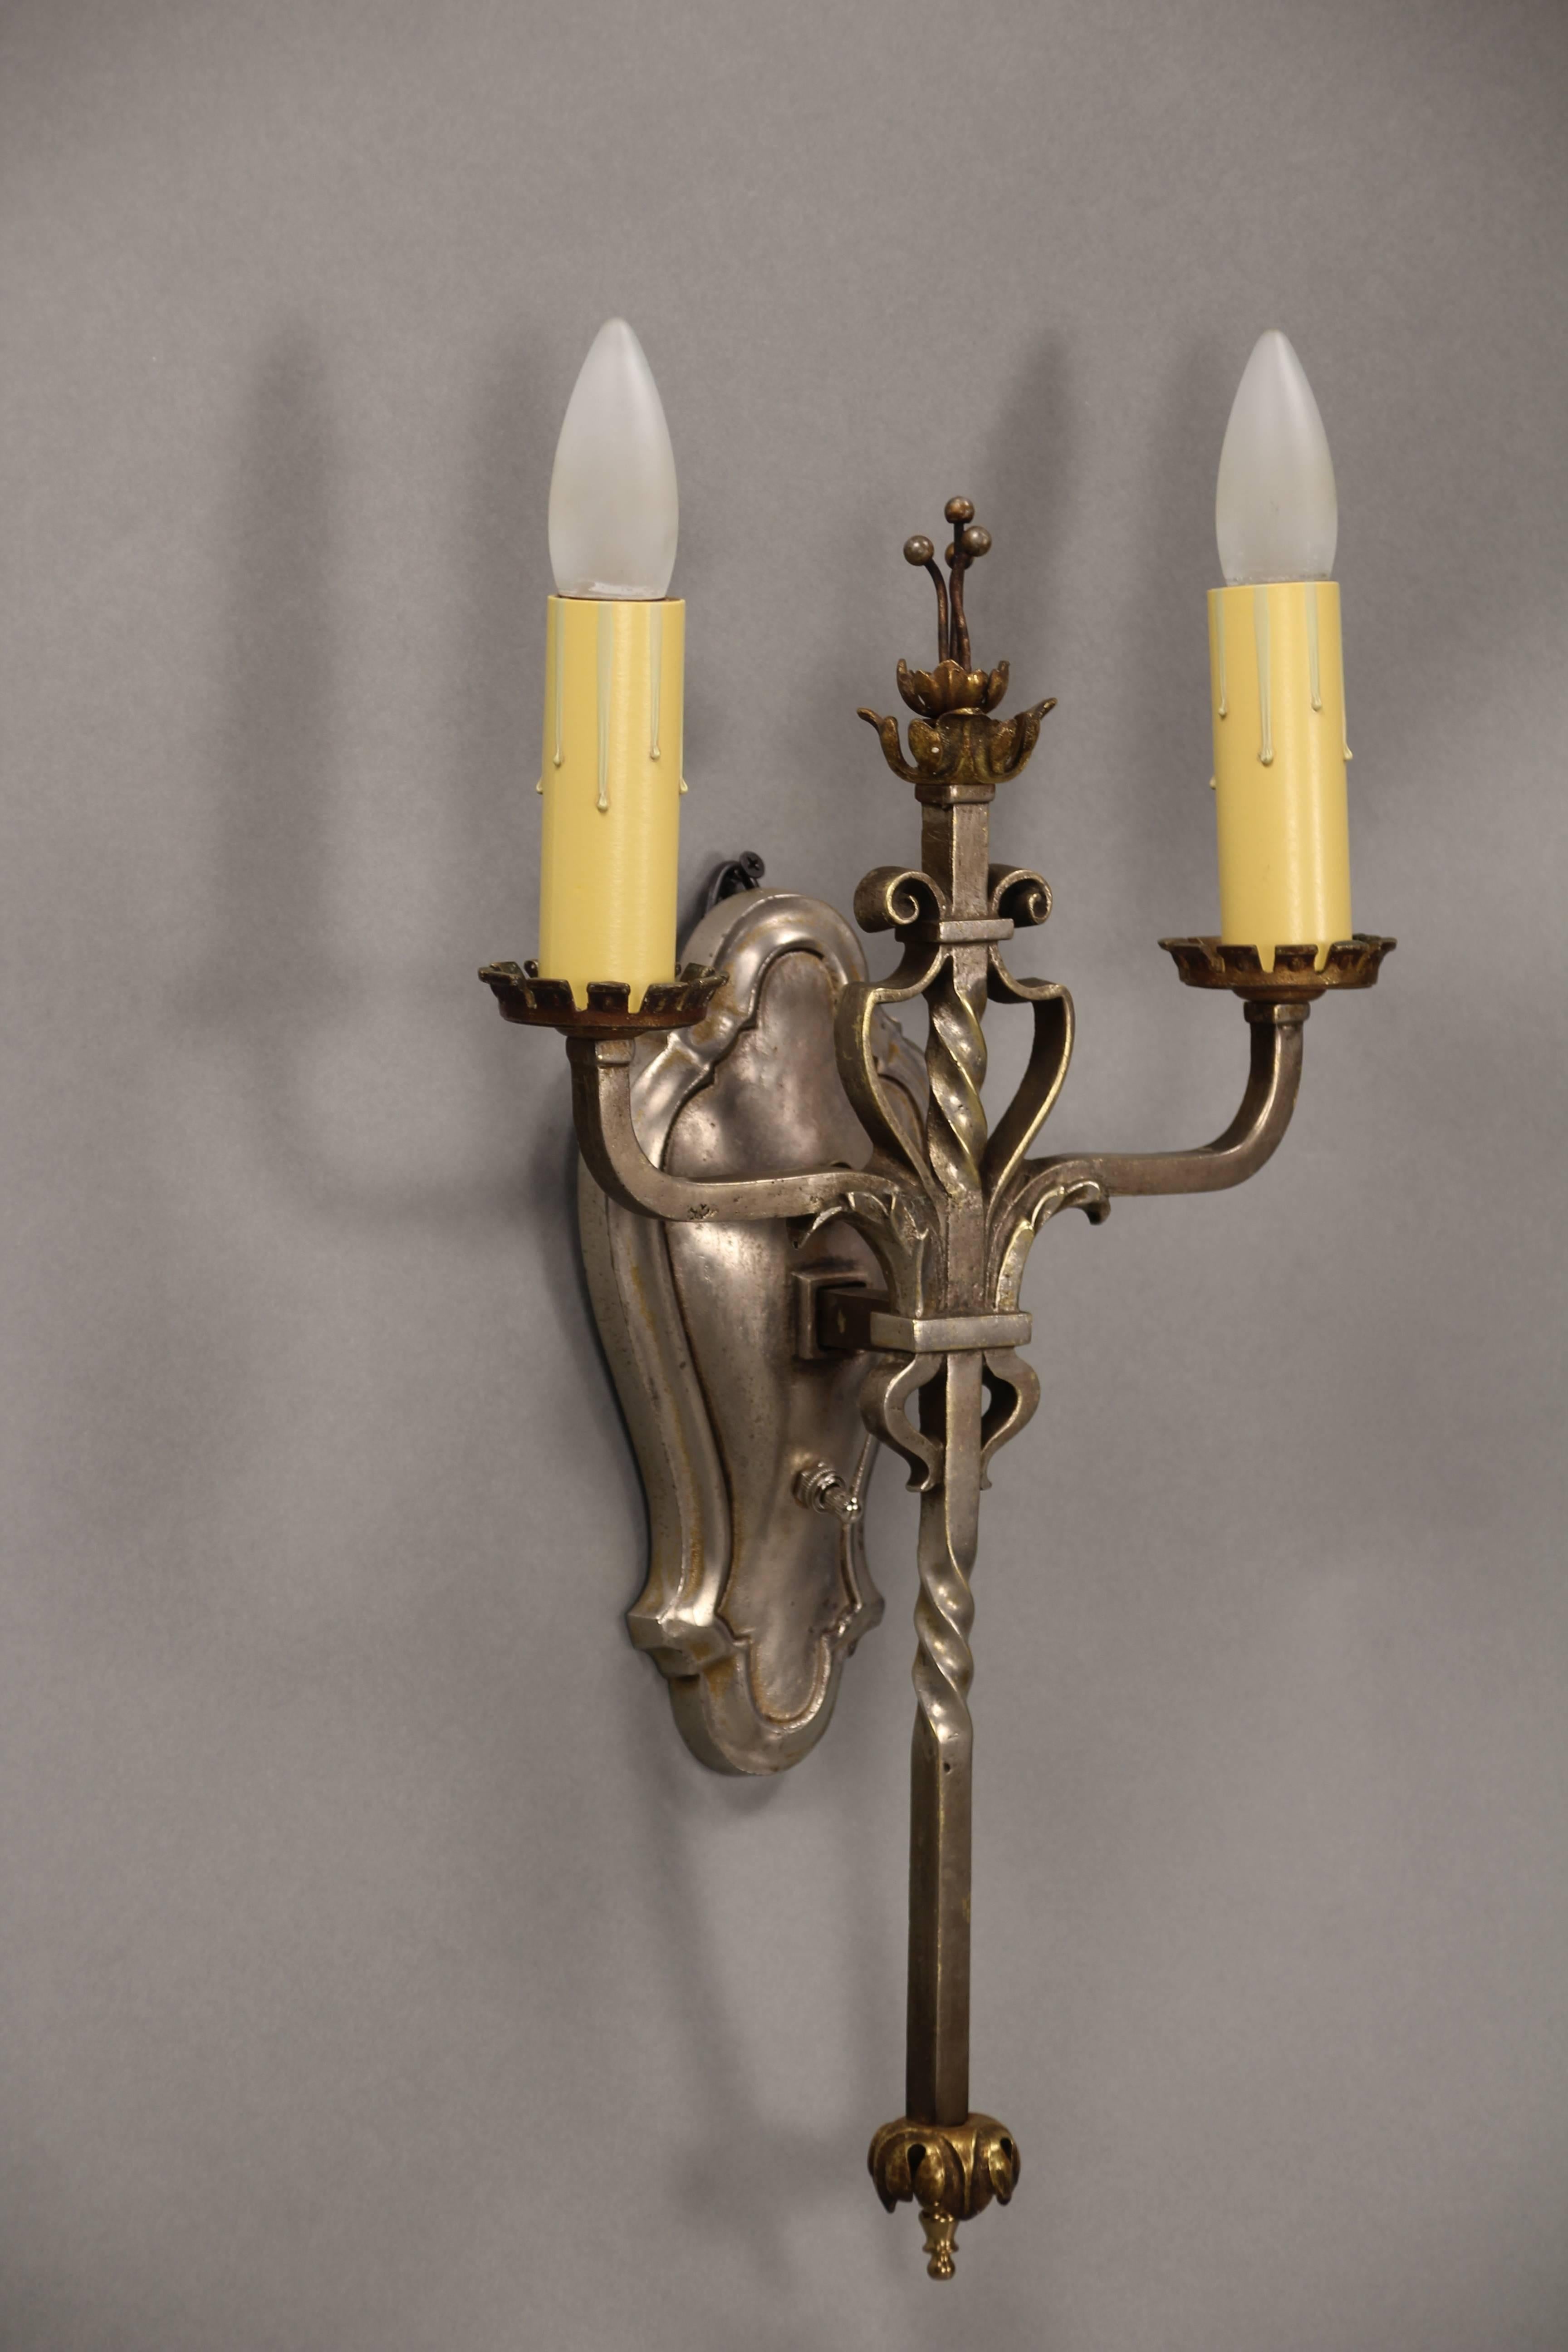 Hard to find two-toned 1920s sconces with silver and brass tone. Would fit nicely in Tudor and Spanish Revival homes.